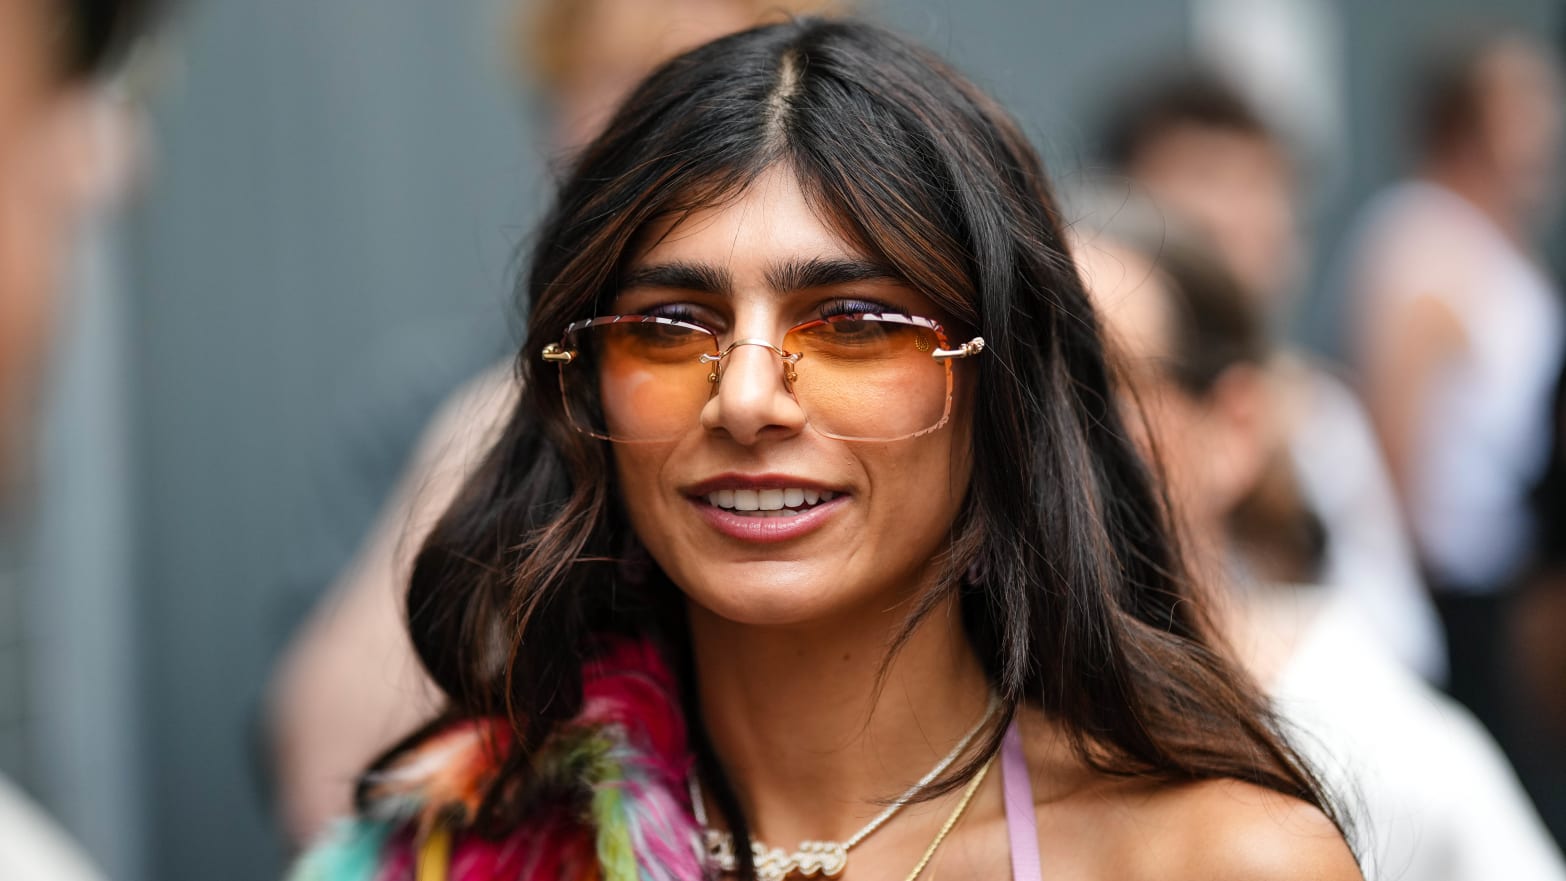 Mia Khalifa Mean - Mia Khalifa Shares Video of Woman Confronting Her Over Israel